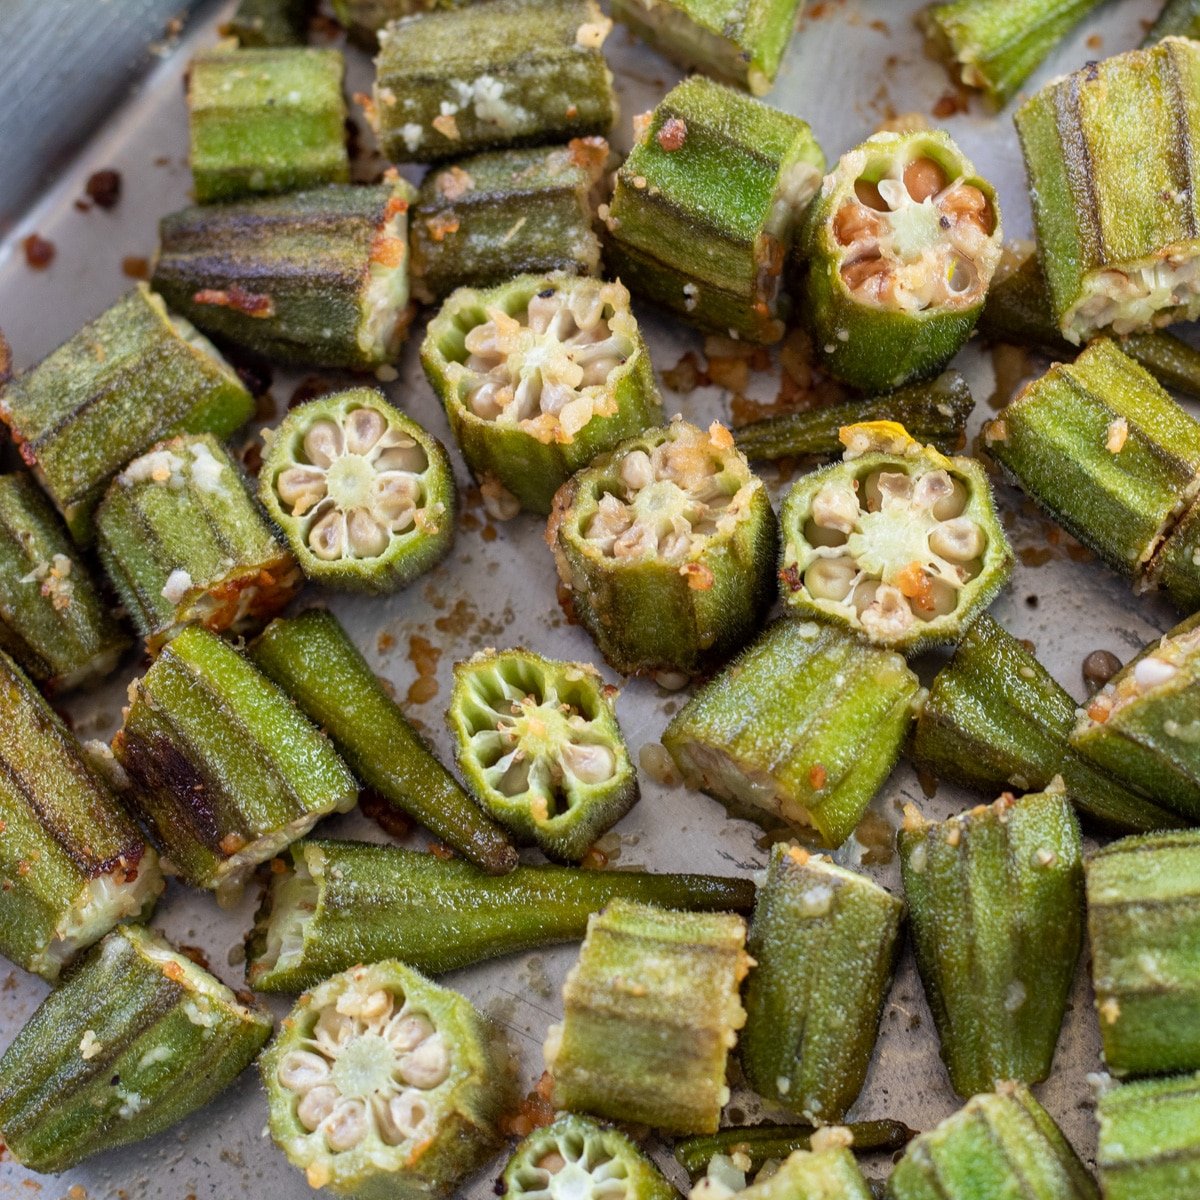 The best roasted okra is easy to make and turns out tender when cut into bite size pieces like these.